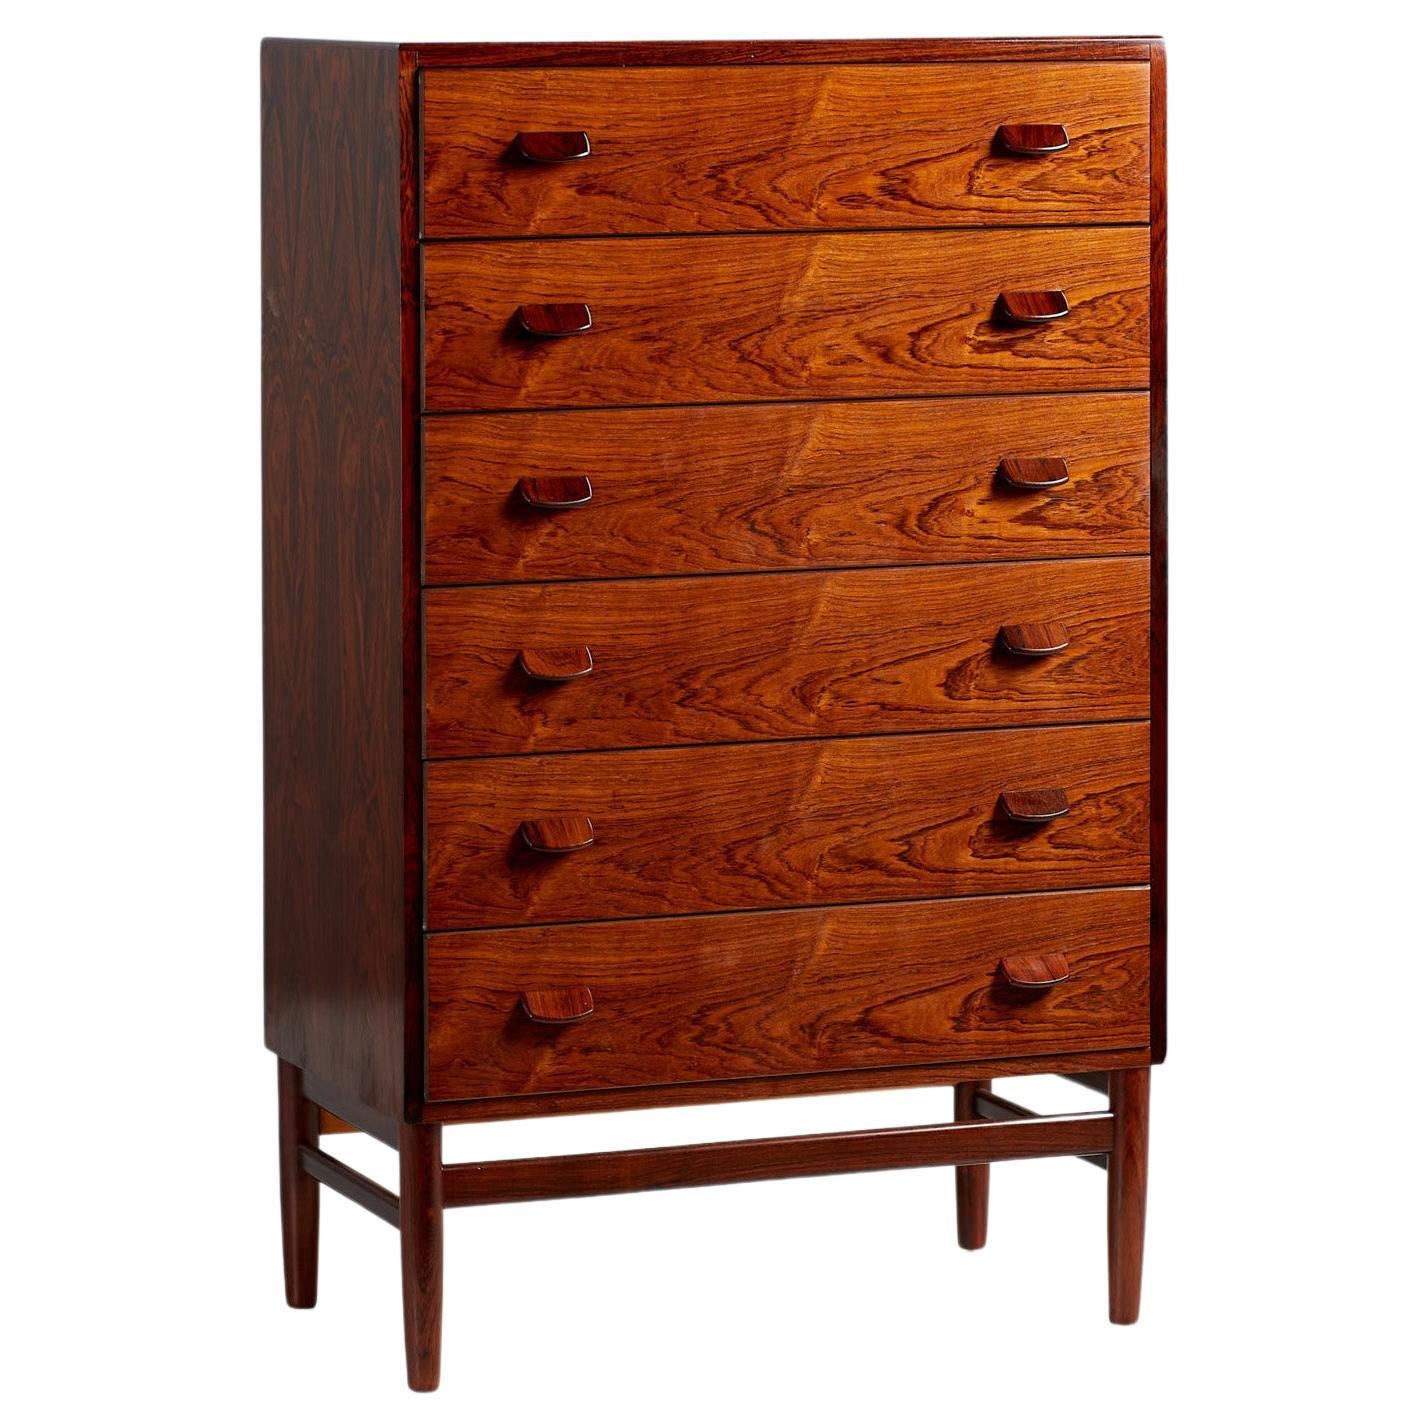 Poul Volther Tall Rosewood Chest of Drawers, circa 1960s